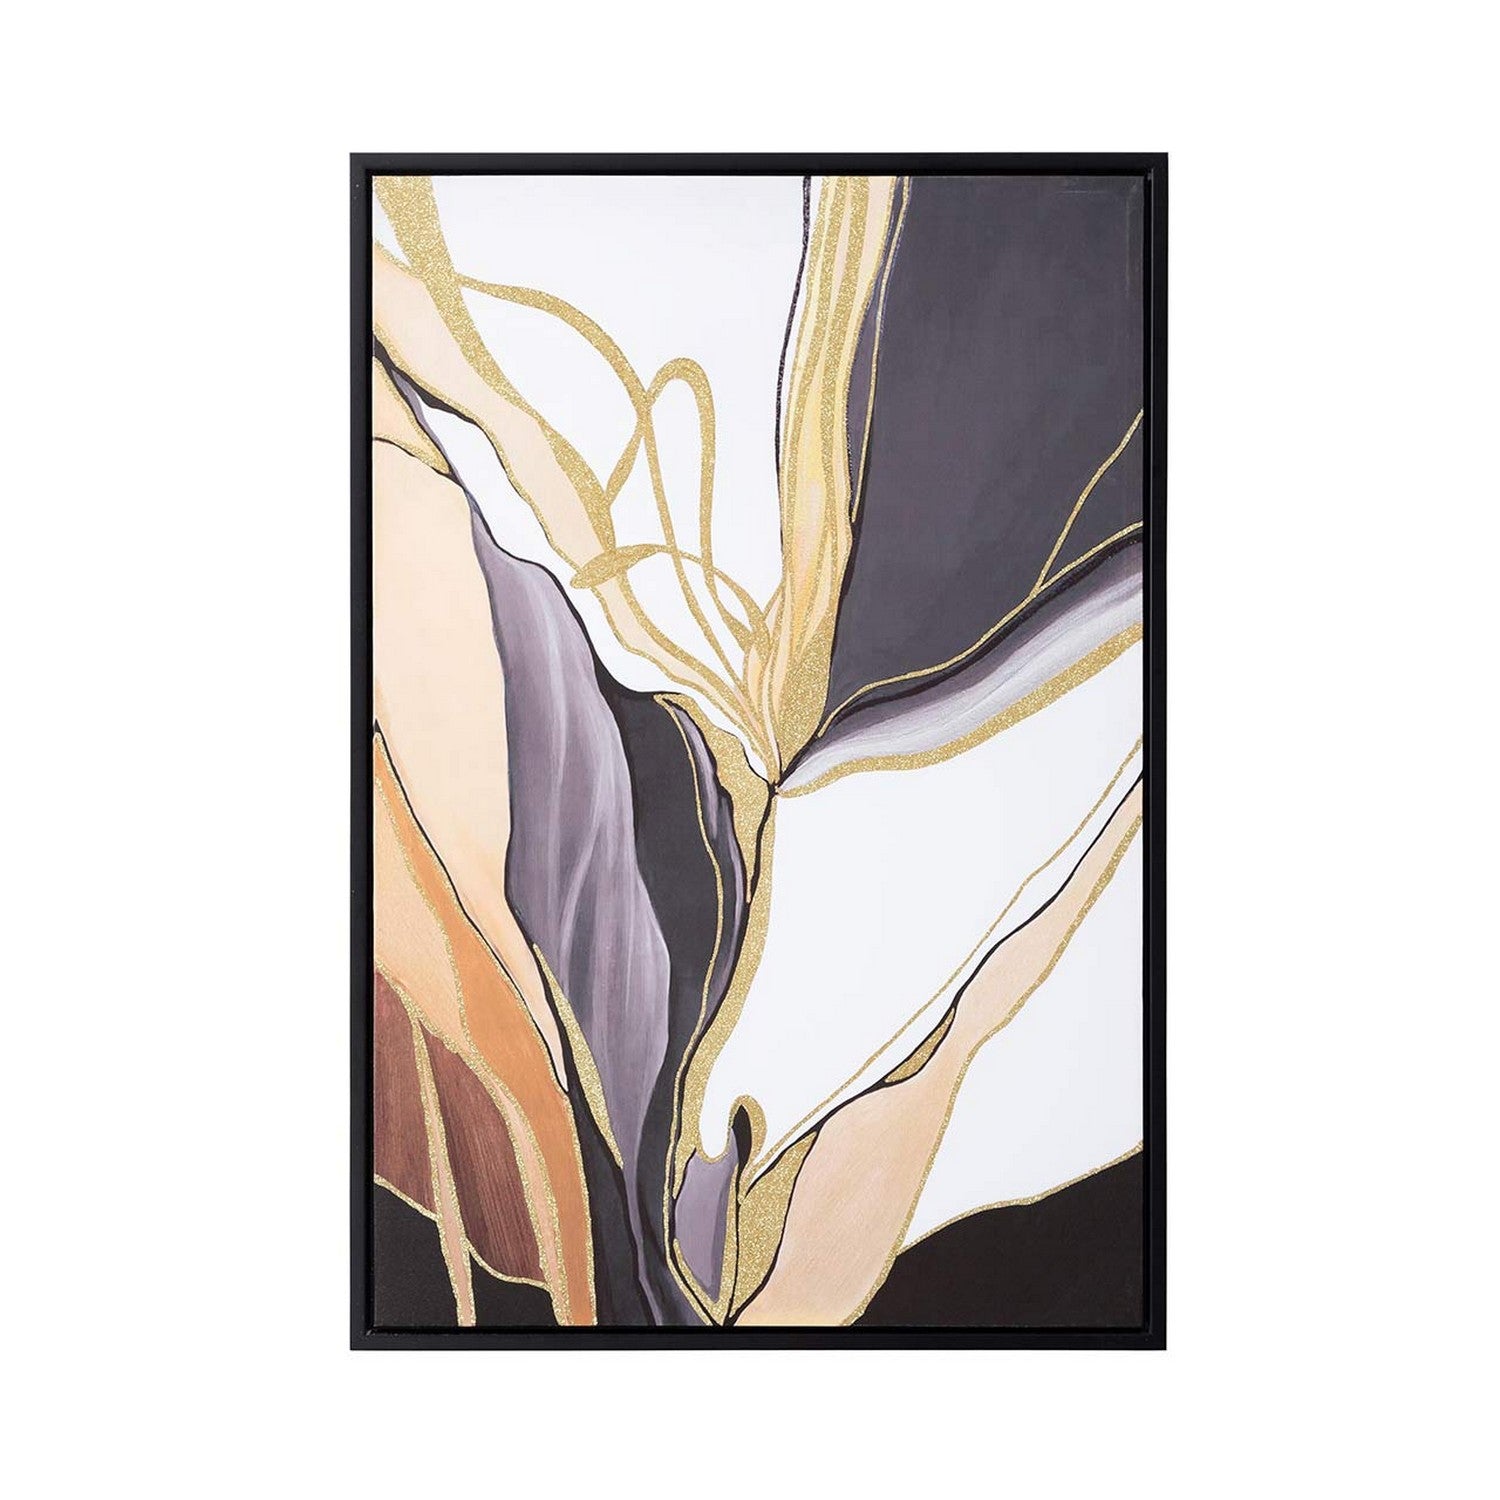 85x125cm Black and Gold Framed Abstract Canvas Wall Art